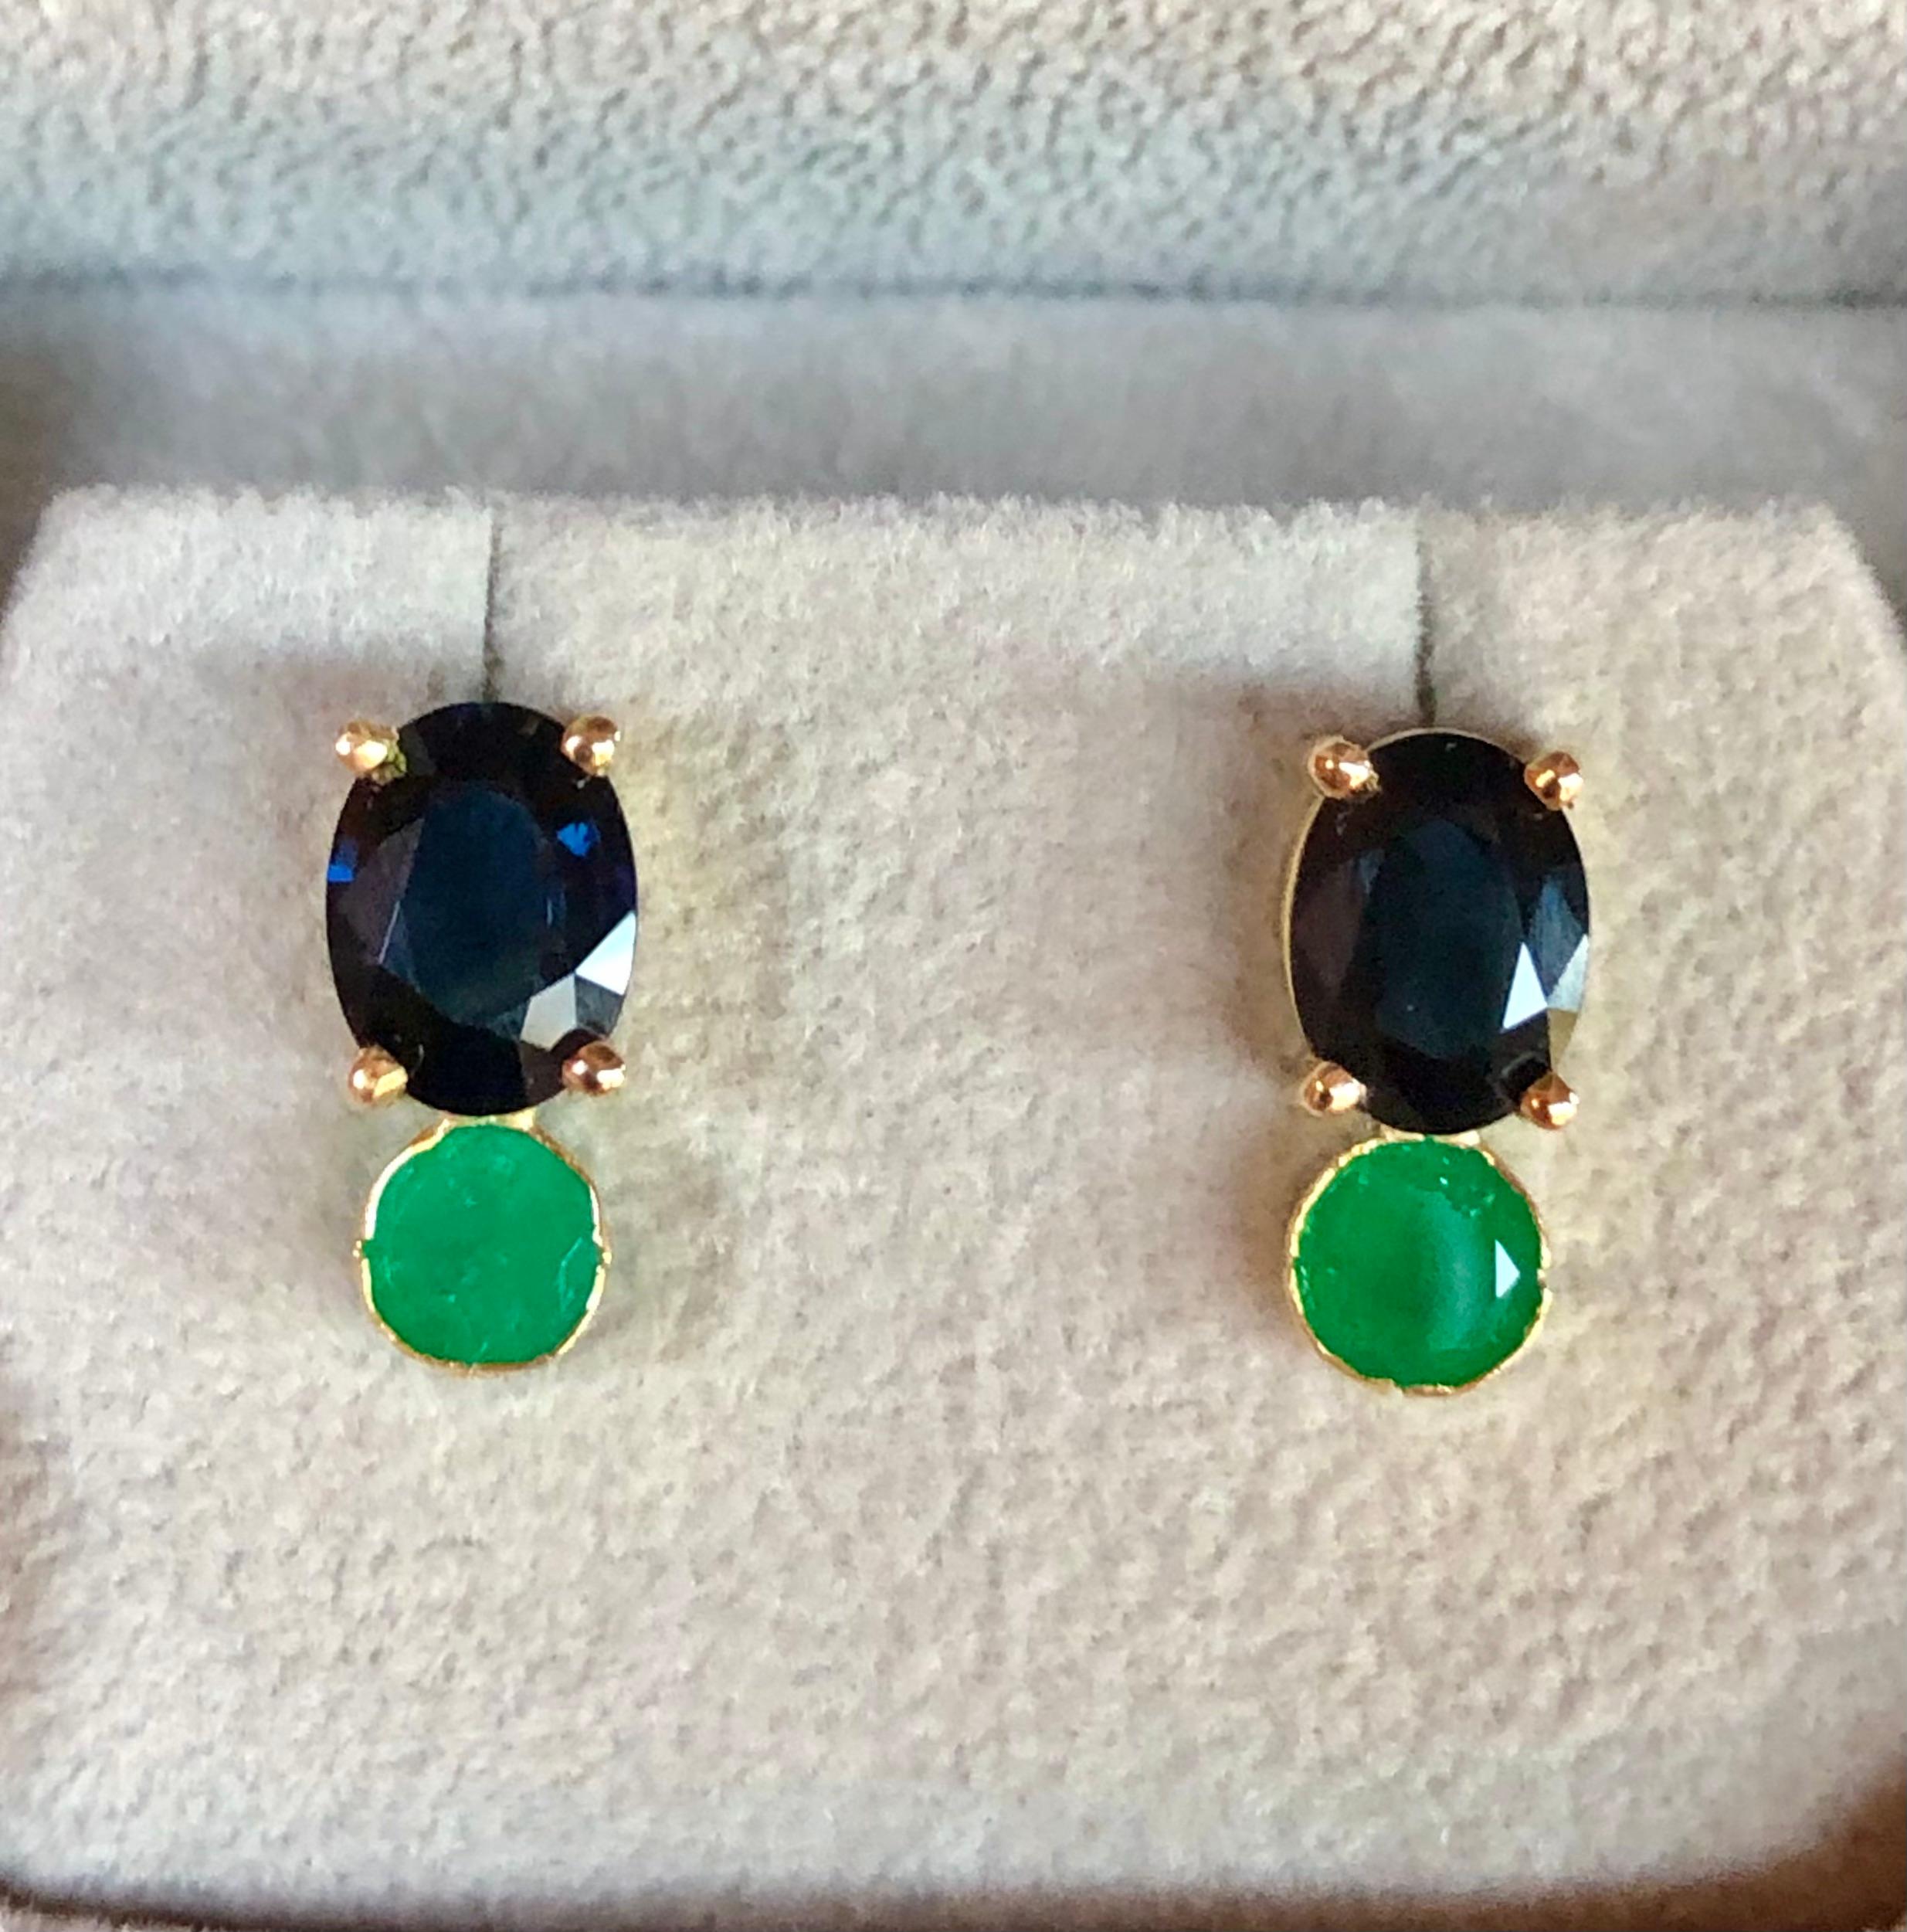 Stunning one-of-a-kind 3.85 carat stud earrings featuring two blue oval royal blue sapphires, and round cut Colombian Emeralds. Set in 18K yellow gold.  
Sapphires weigh 2.65 carats, VS in clarity 
Colombian emeralds 1.20 caras, SI in